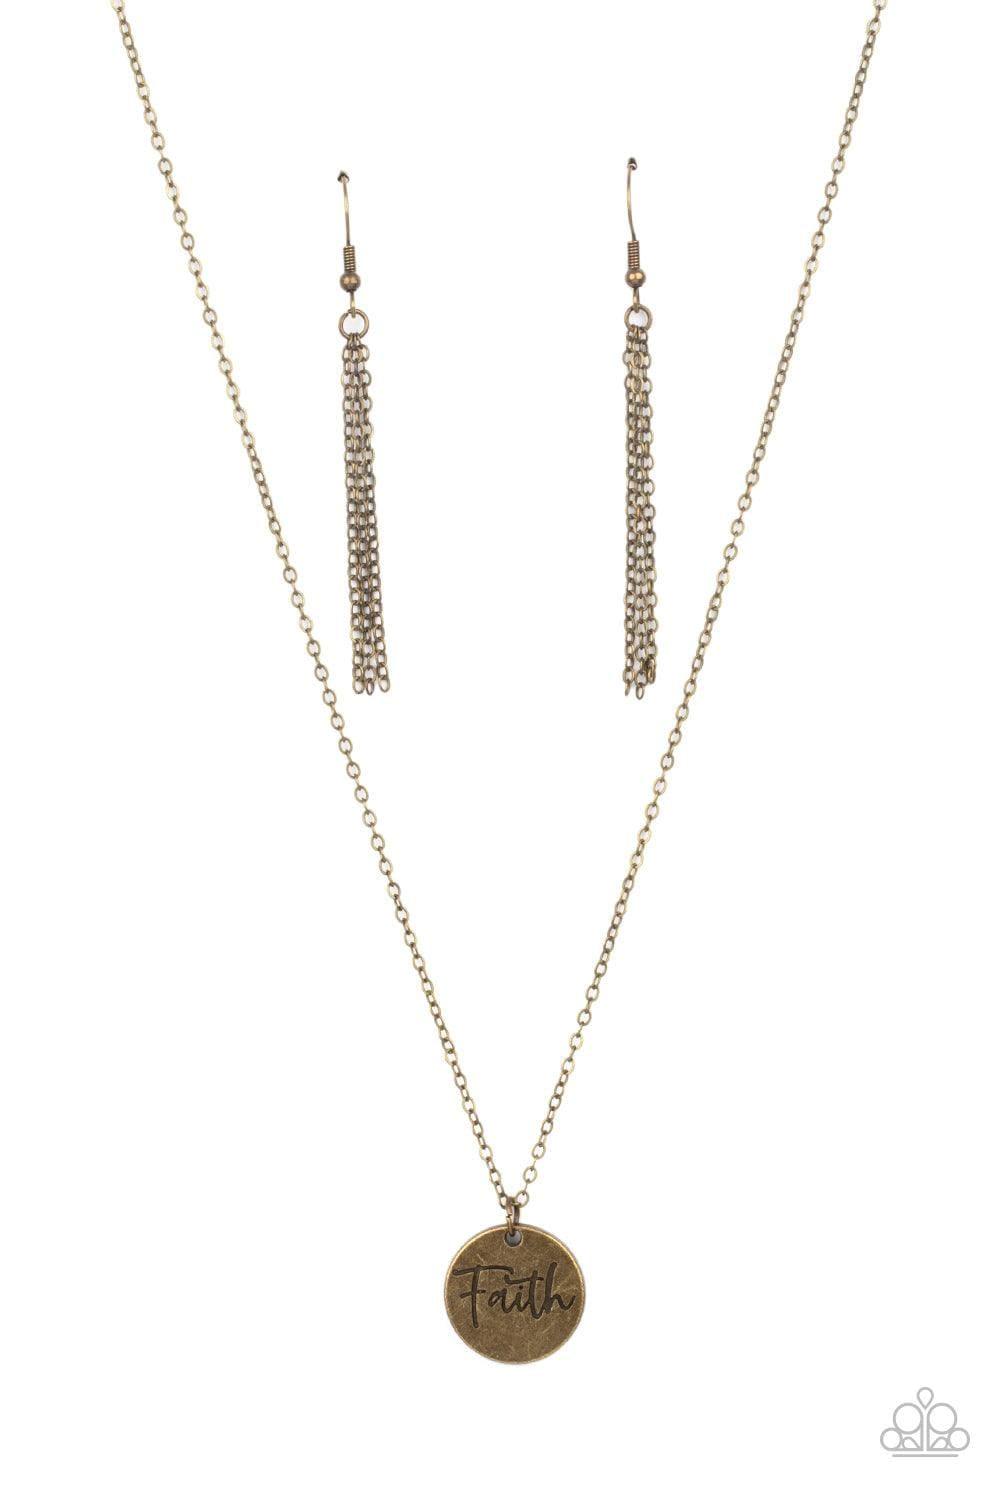 Paparazzi Accessories - Choose Faith - Brass Dainty Necklace - Bling by JessieK